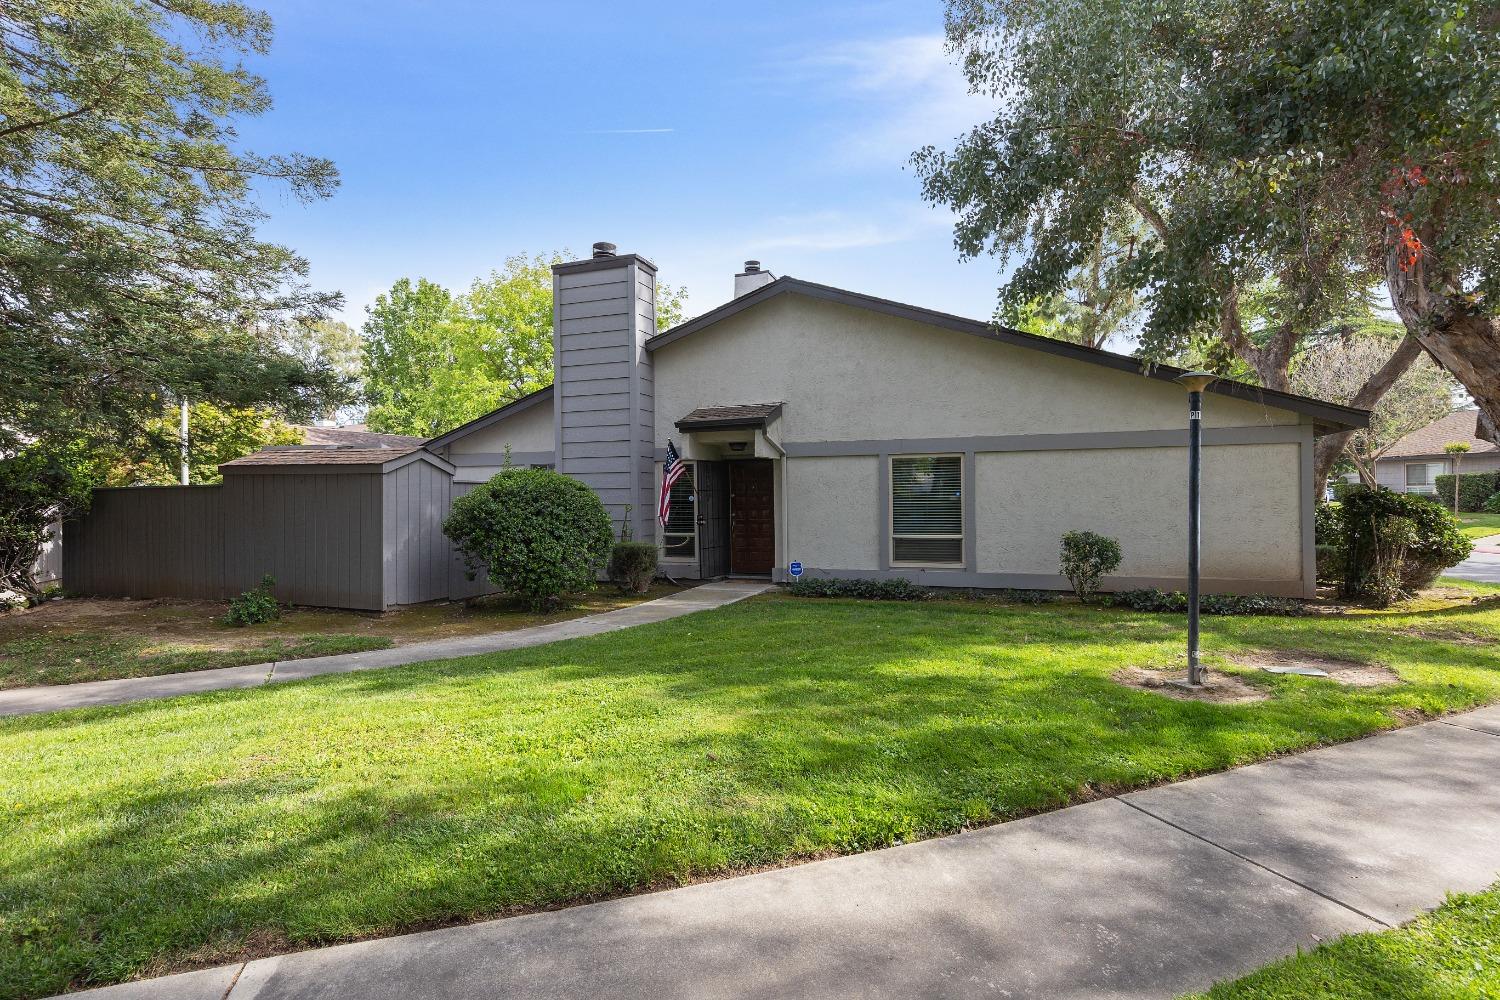 Photo of 6357 Port Gibson Ct in Citrus Heights, CA